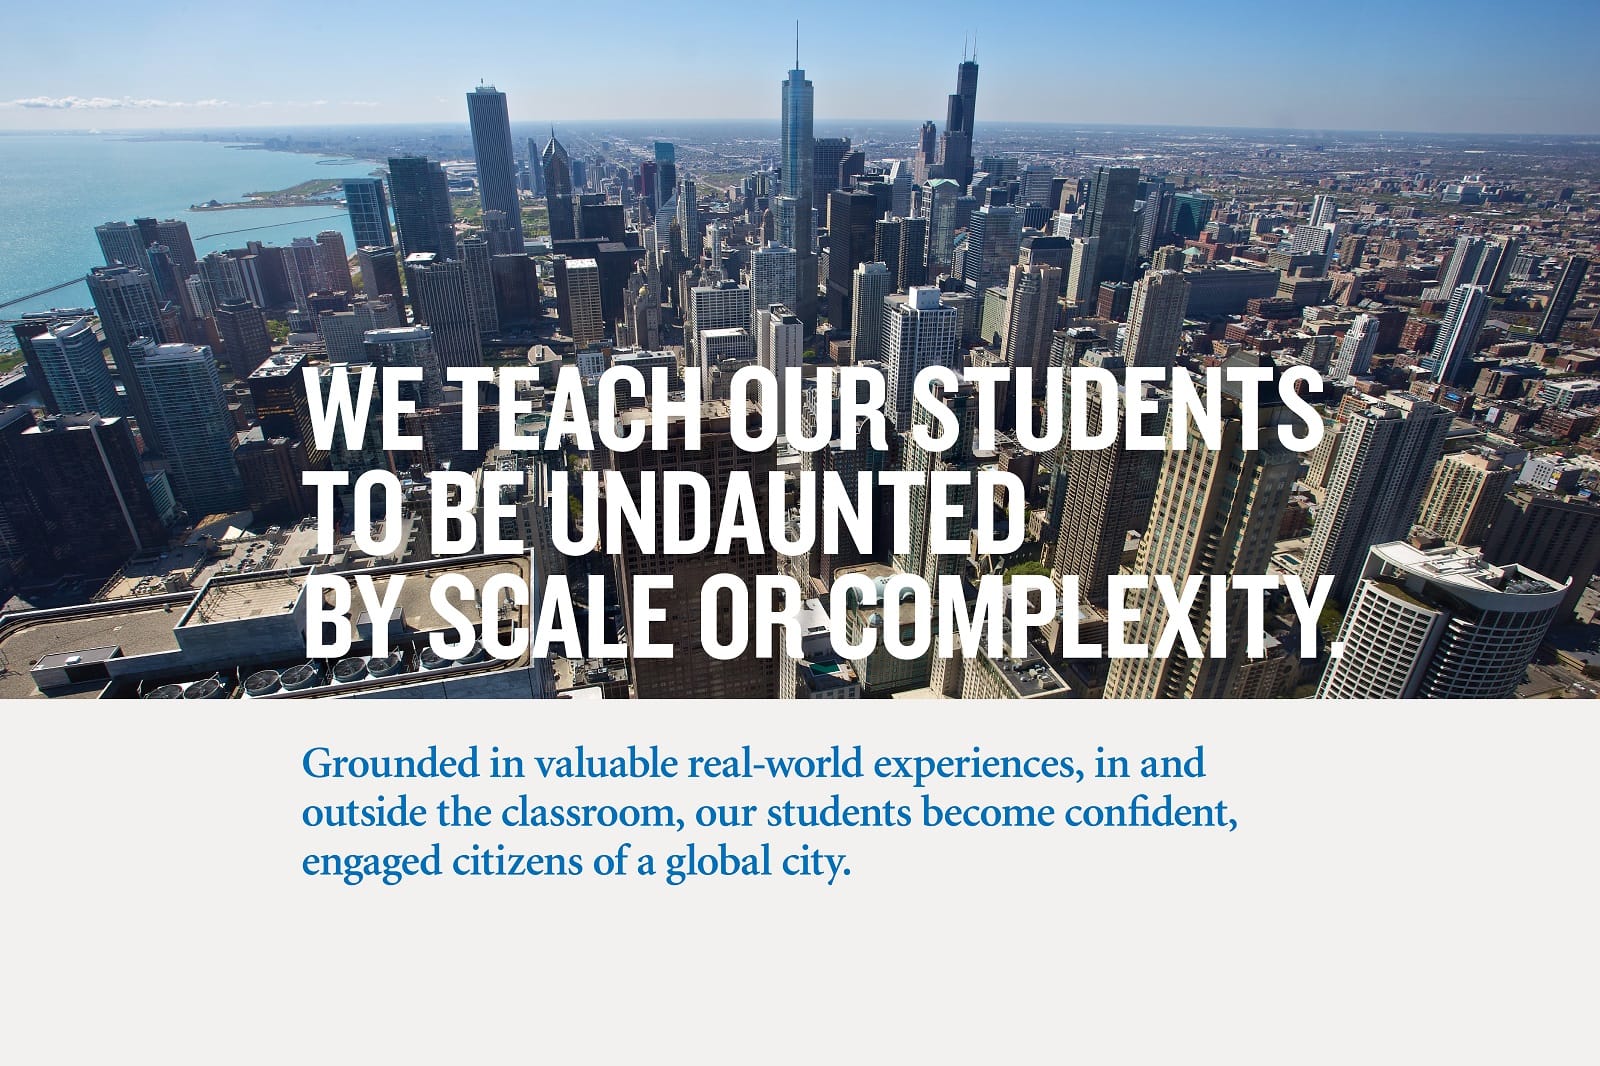 We teach our students to be undaunted by scale or complexity.